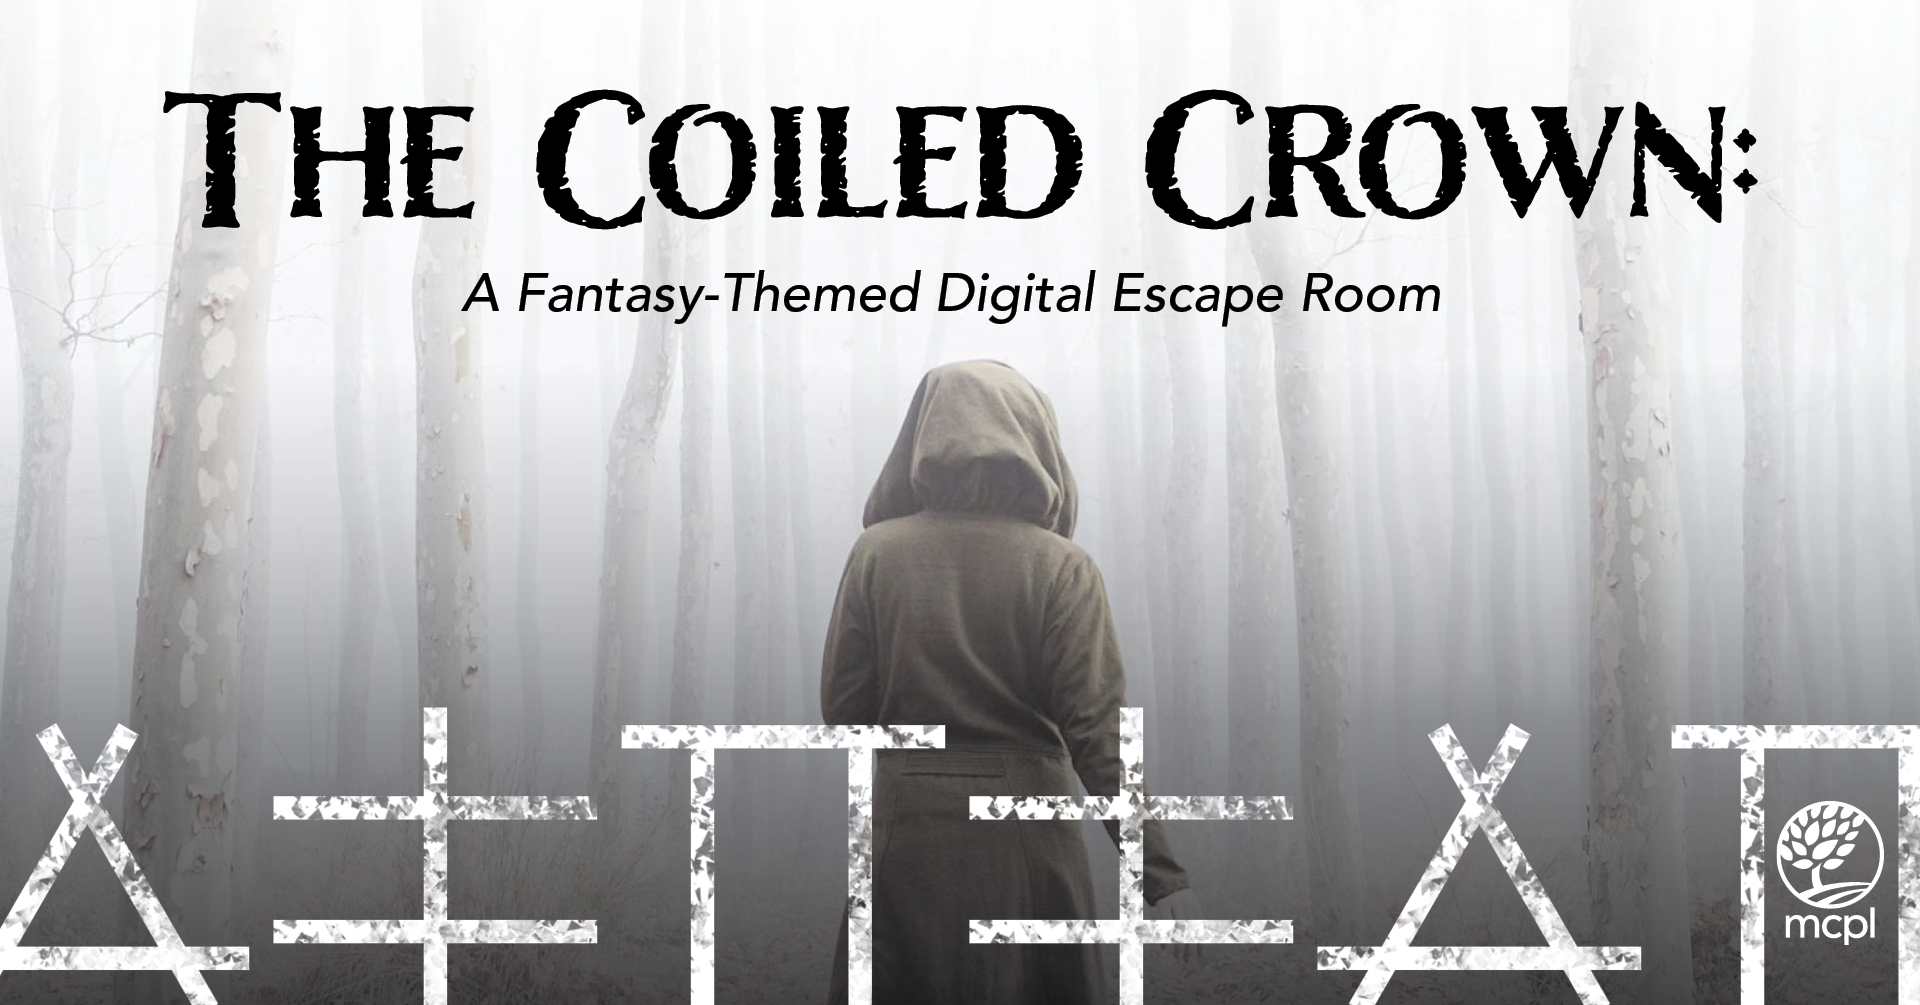 The Coiled Crown: A Fantasy-Themed Digital Escape Room